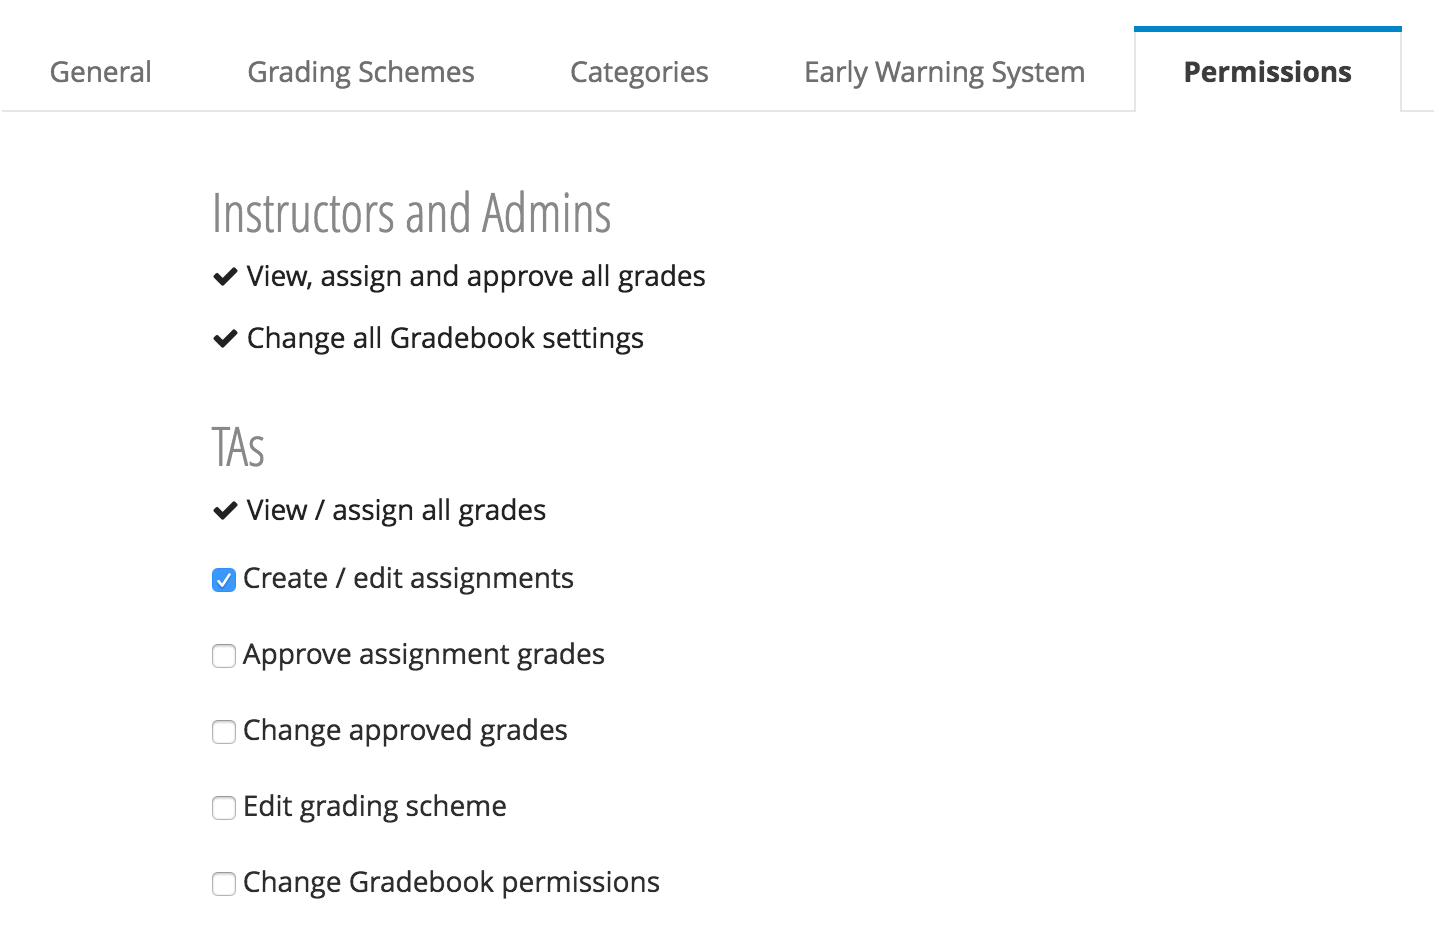 Approved grades permissions